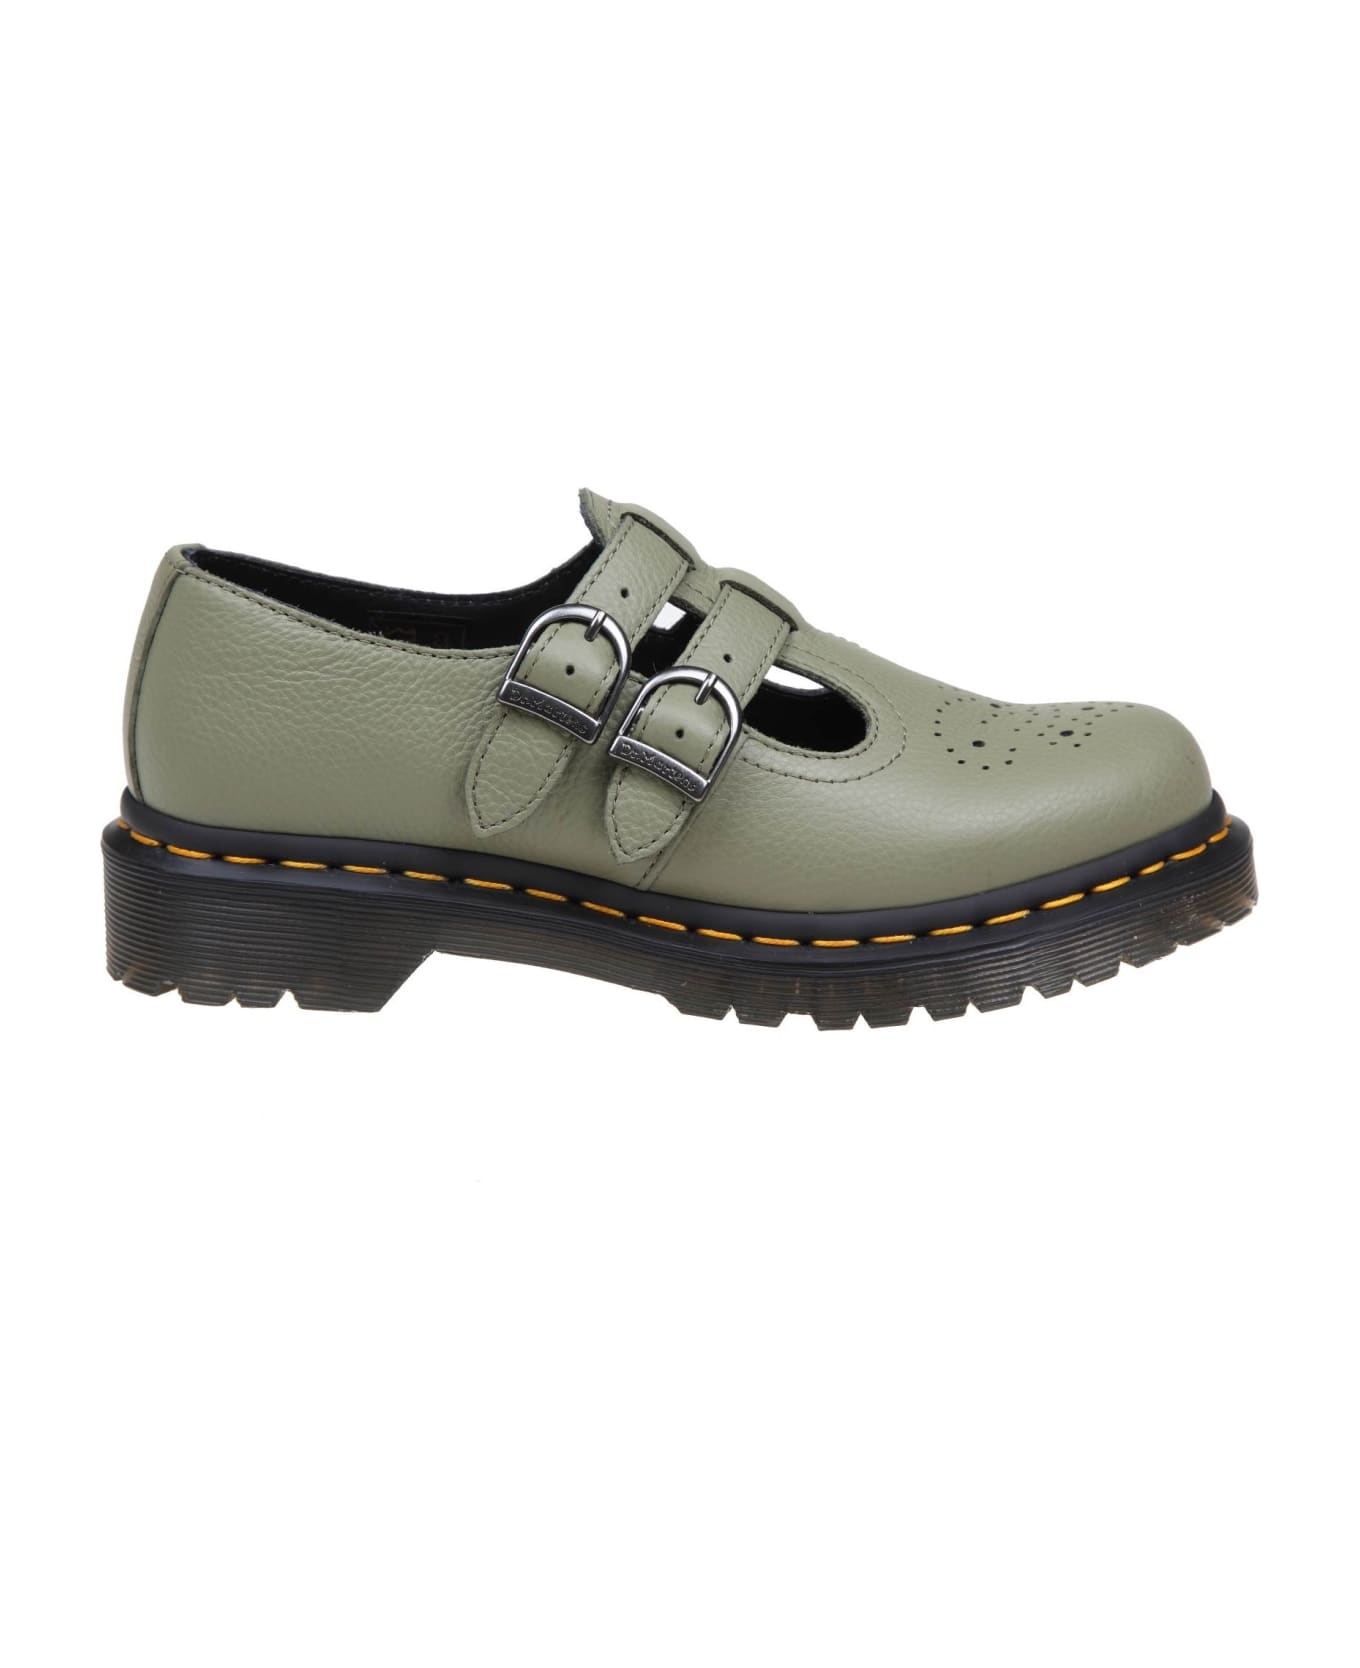 Dr. Martens 8065 Mary Jane Shoe In Olive Green Leather - Olive